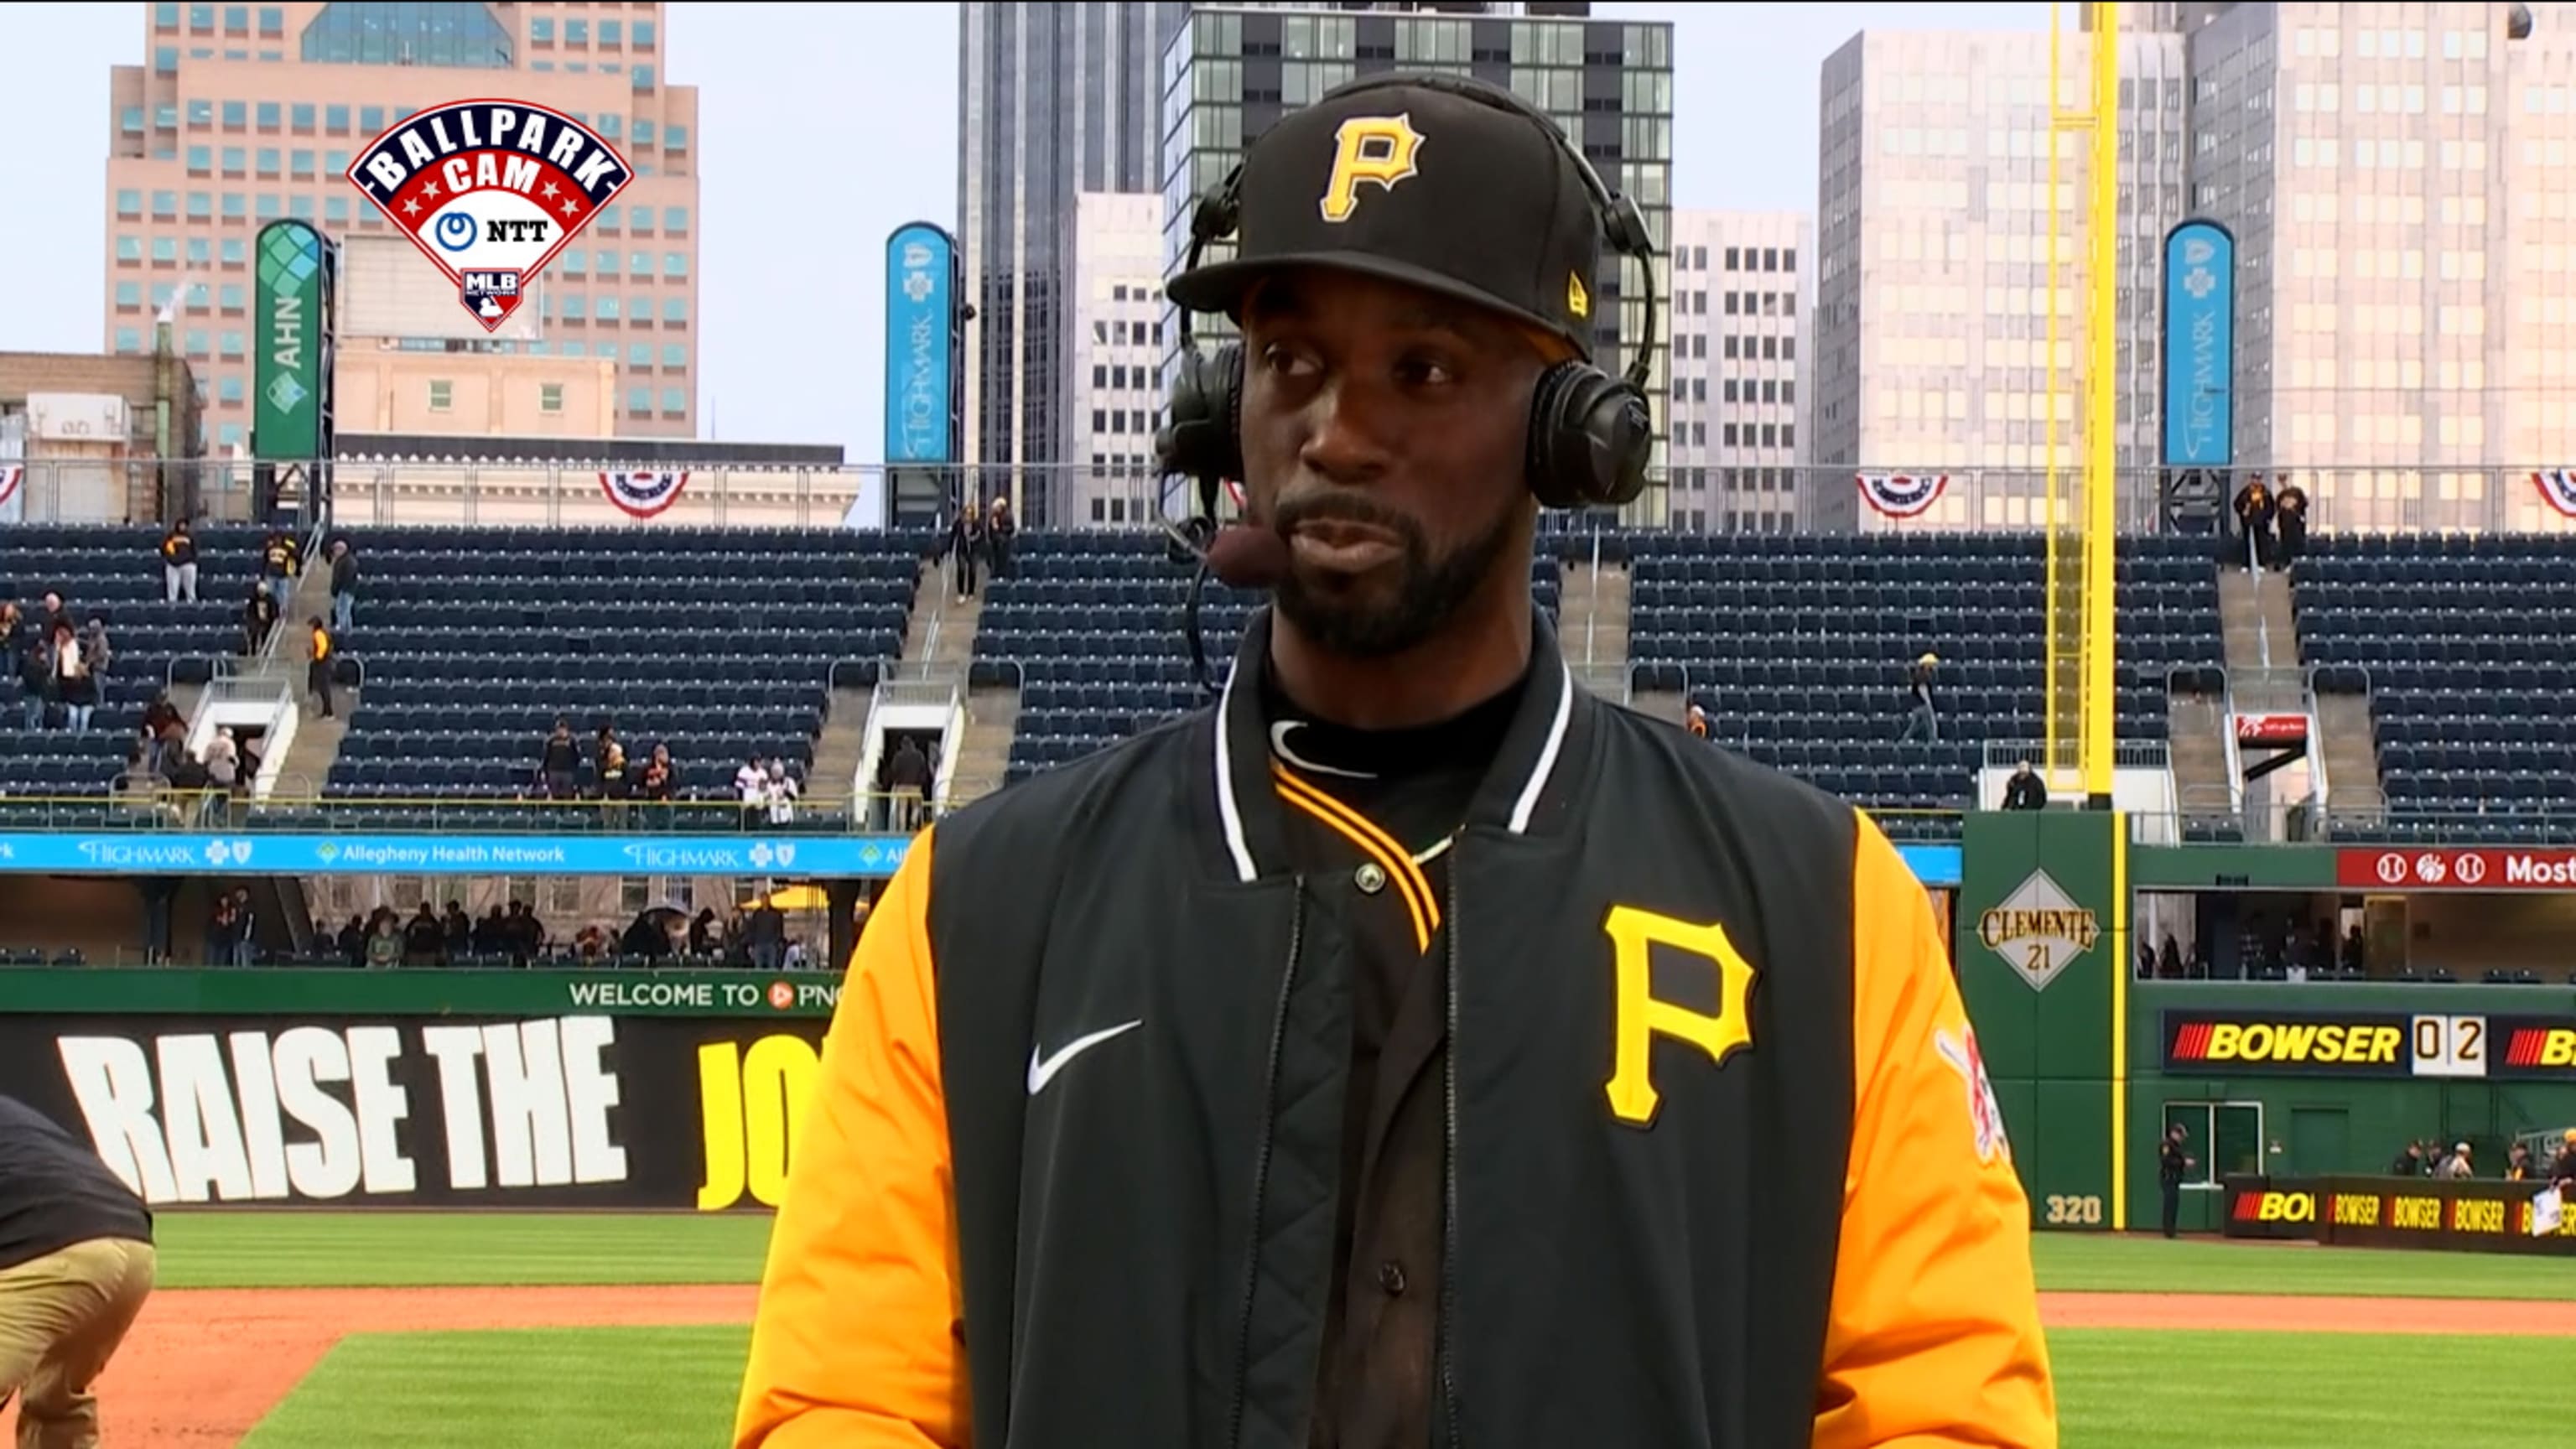 Andrew McCutchen 'getting really excited' about revamped bullpen